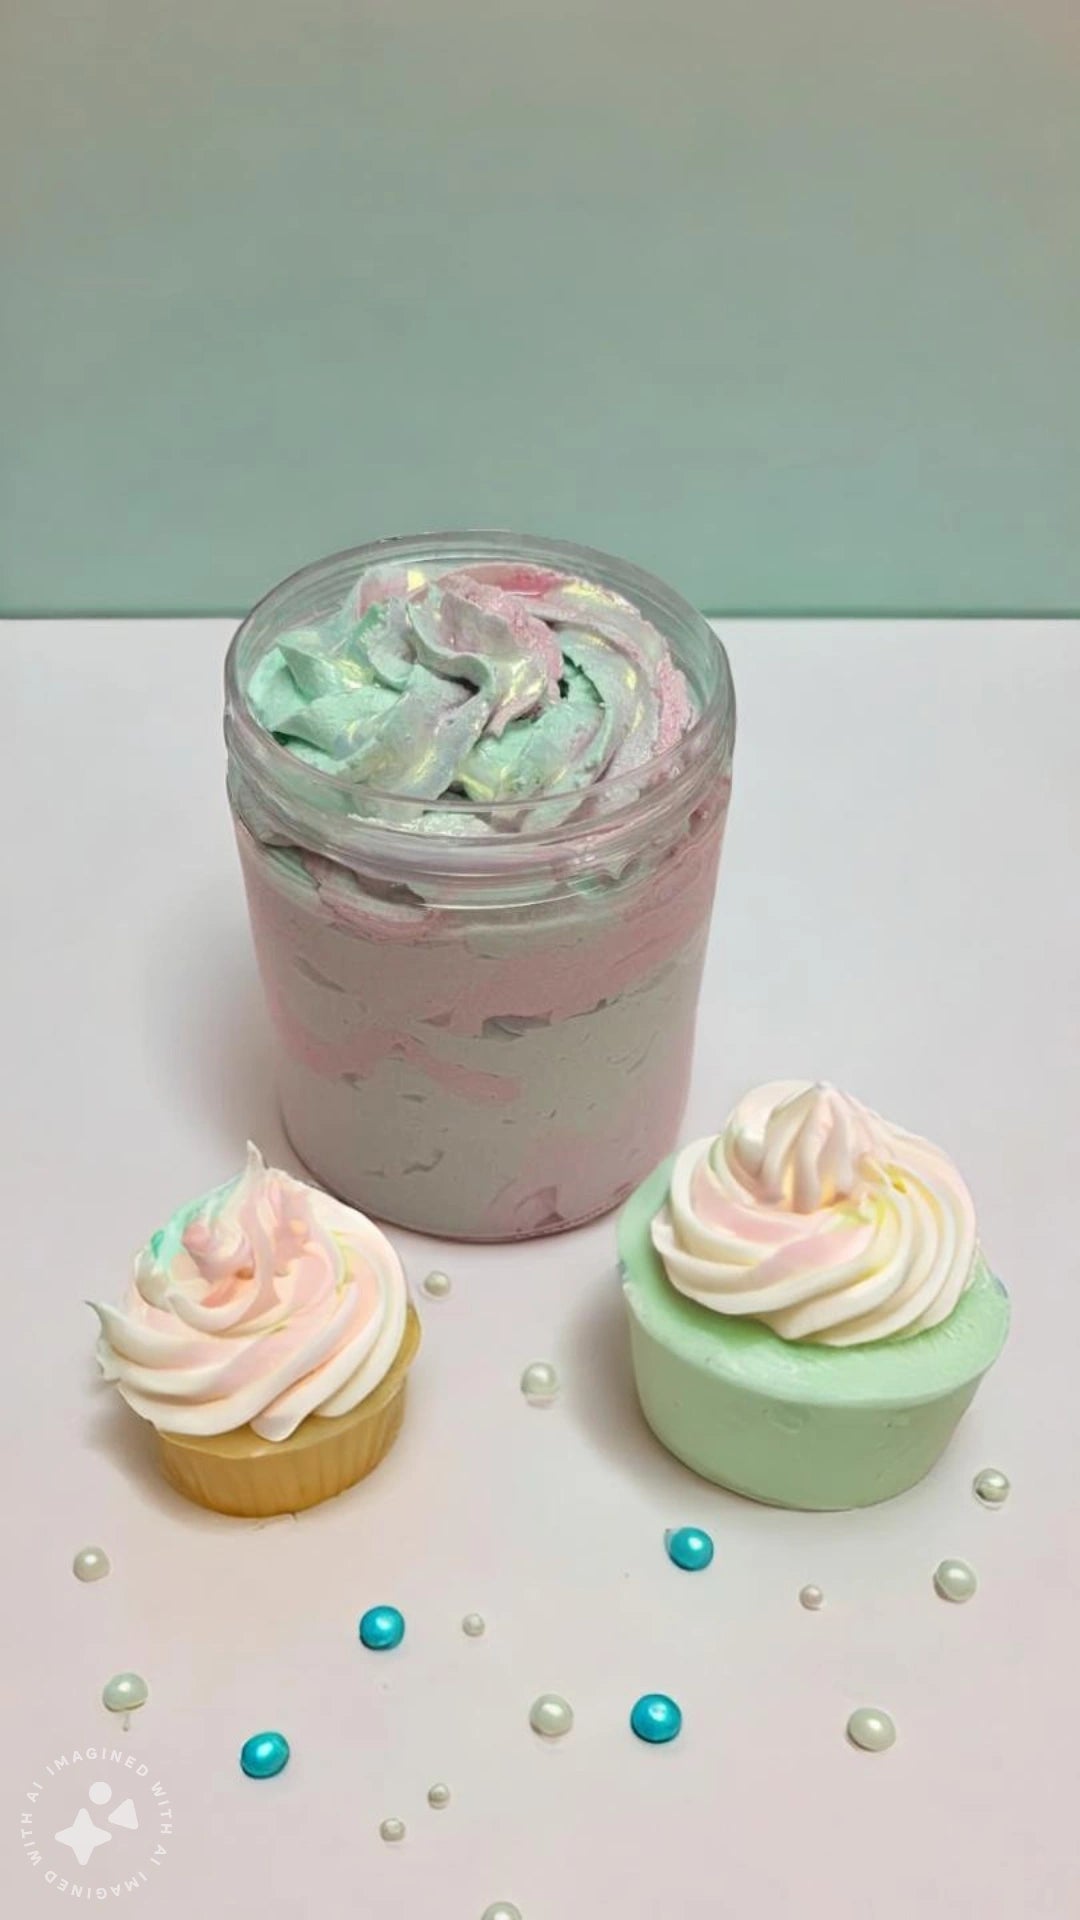 Whipped Body Butter/ CupCake 🧁